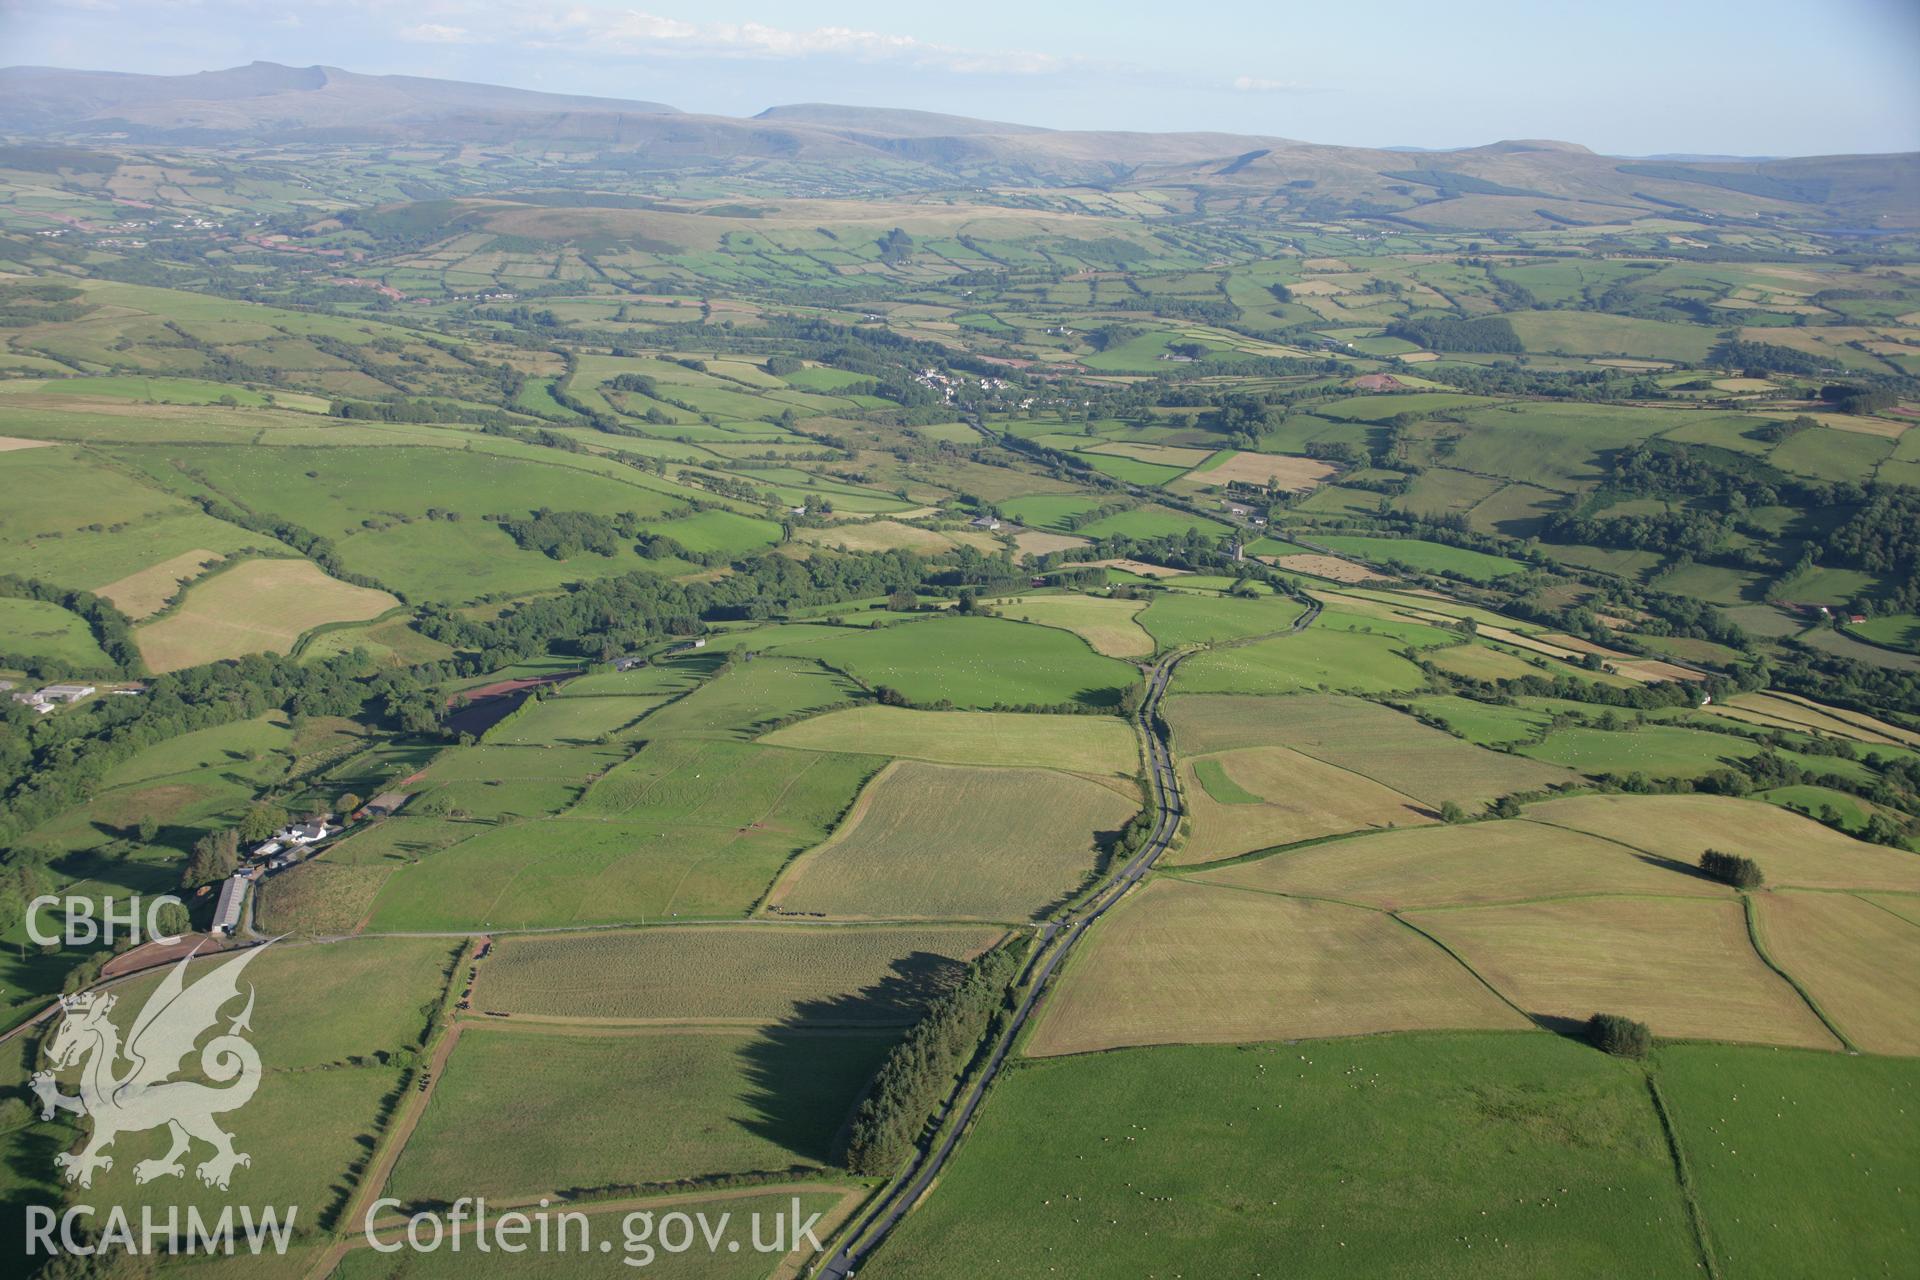 RCAHMW colour oblique aerial photograph of landscape to the north of Llwyel village. Taken on 08 August 2007 by Toby Driver